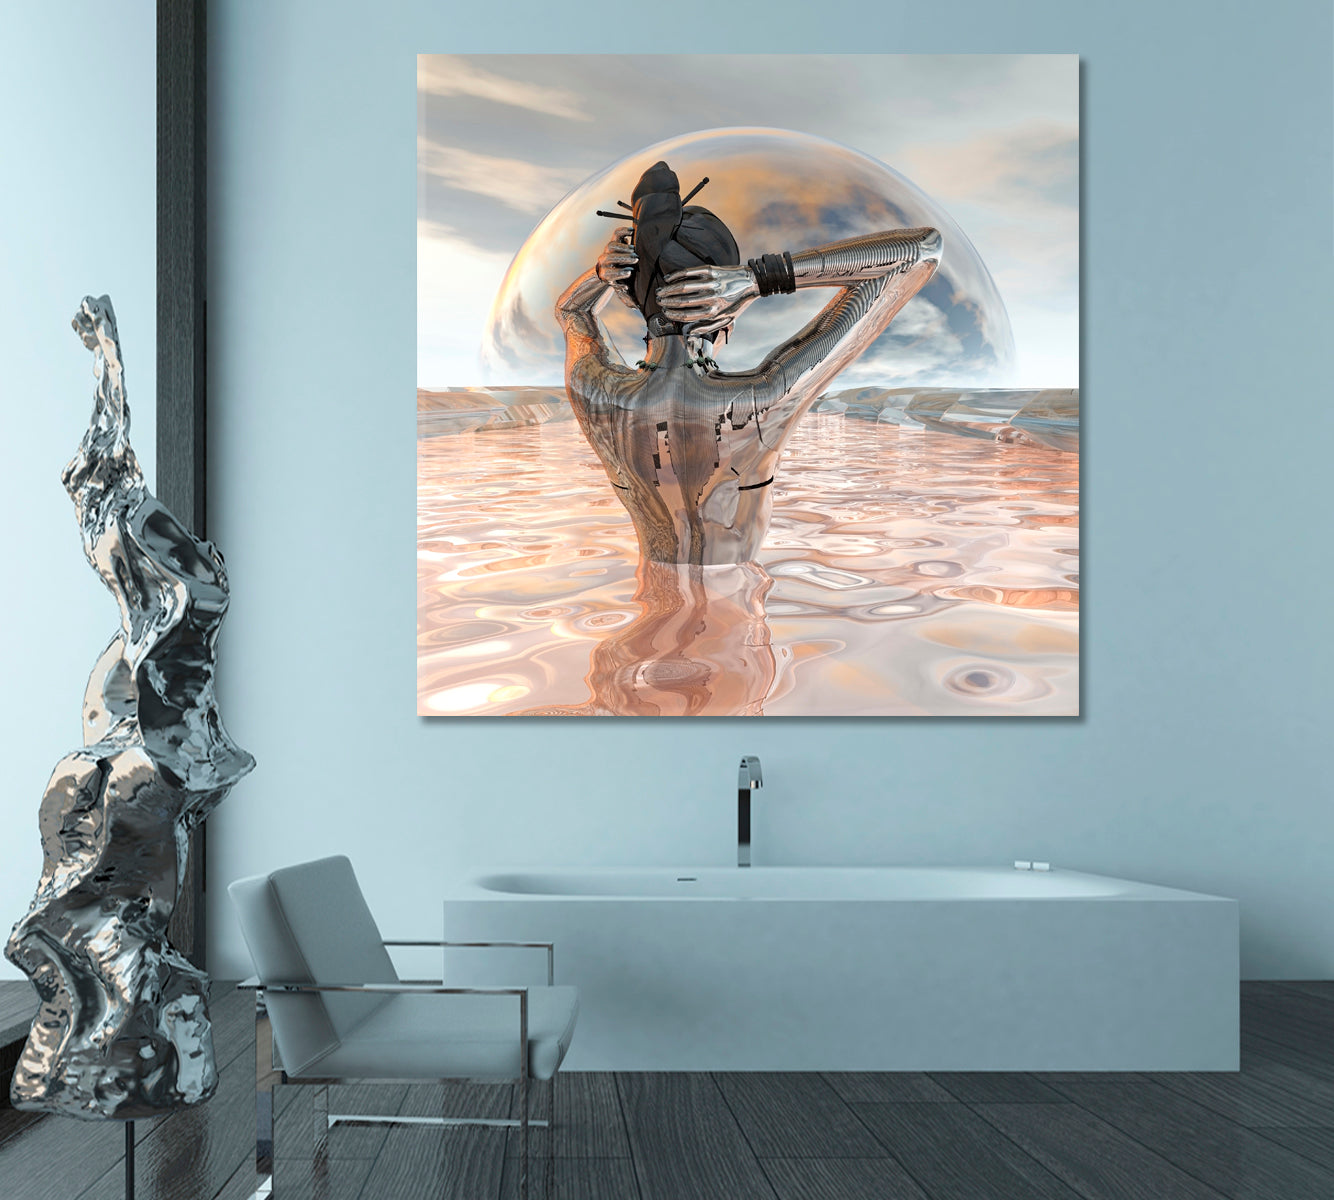 FANTASY Surreal | Source of Energy for Body and Soul Canvas Print - Square Panel Surreal Fantasy Large Art Print Décor Artesty   